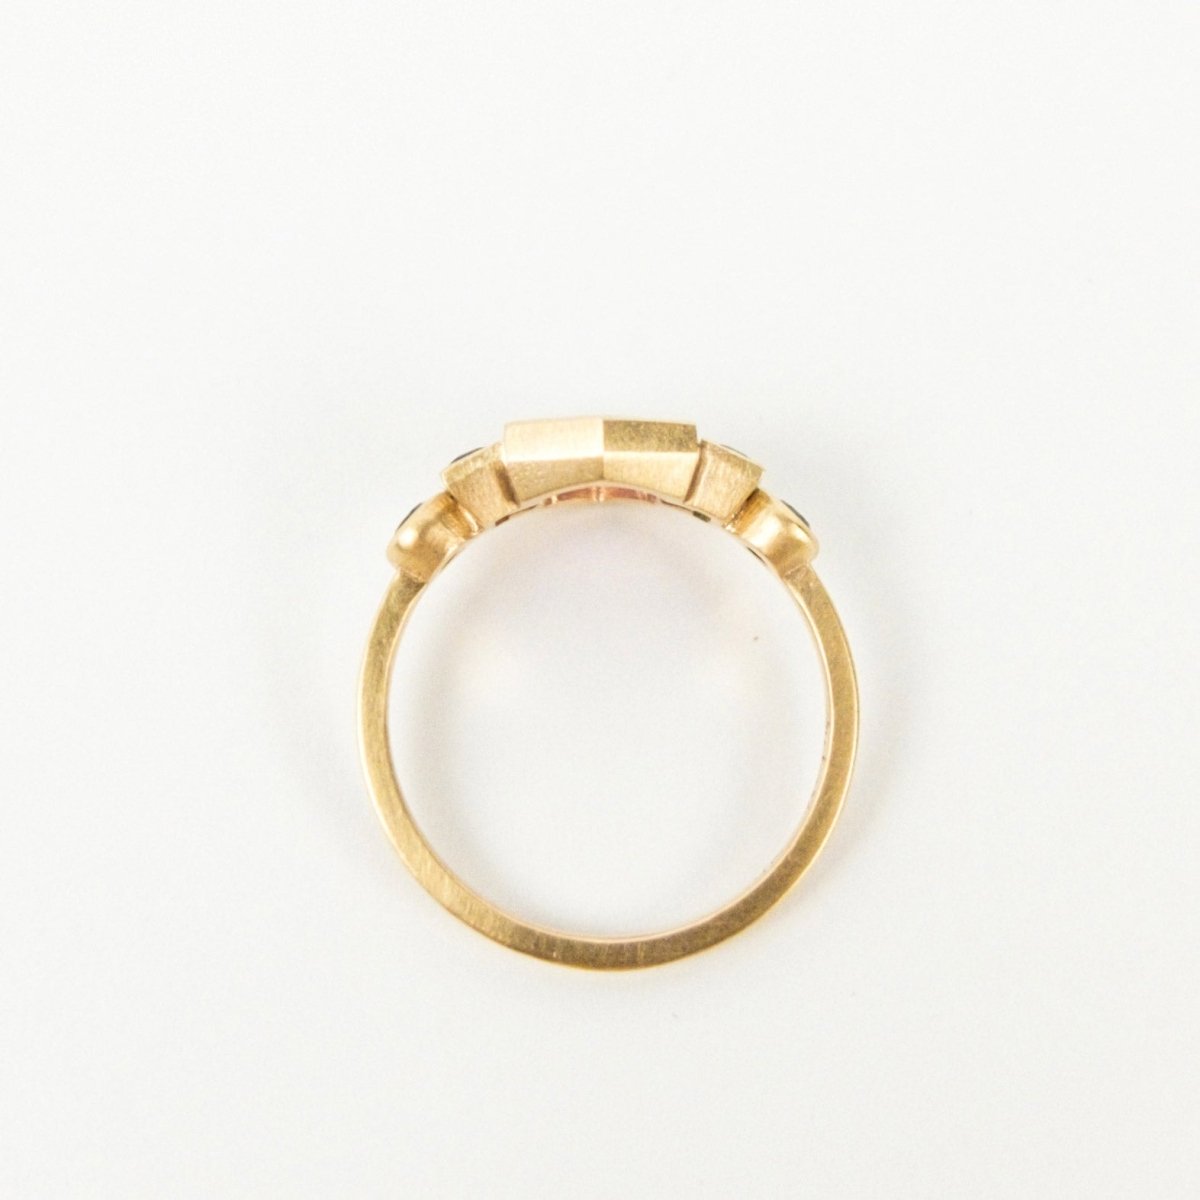 side view of geometric bezels of 10k gold ring